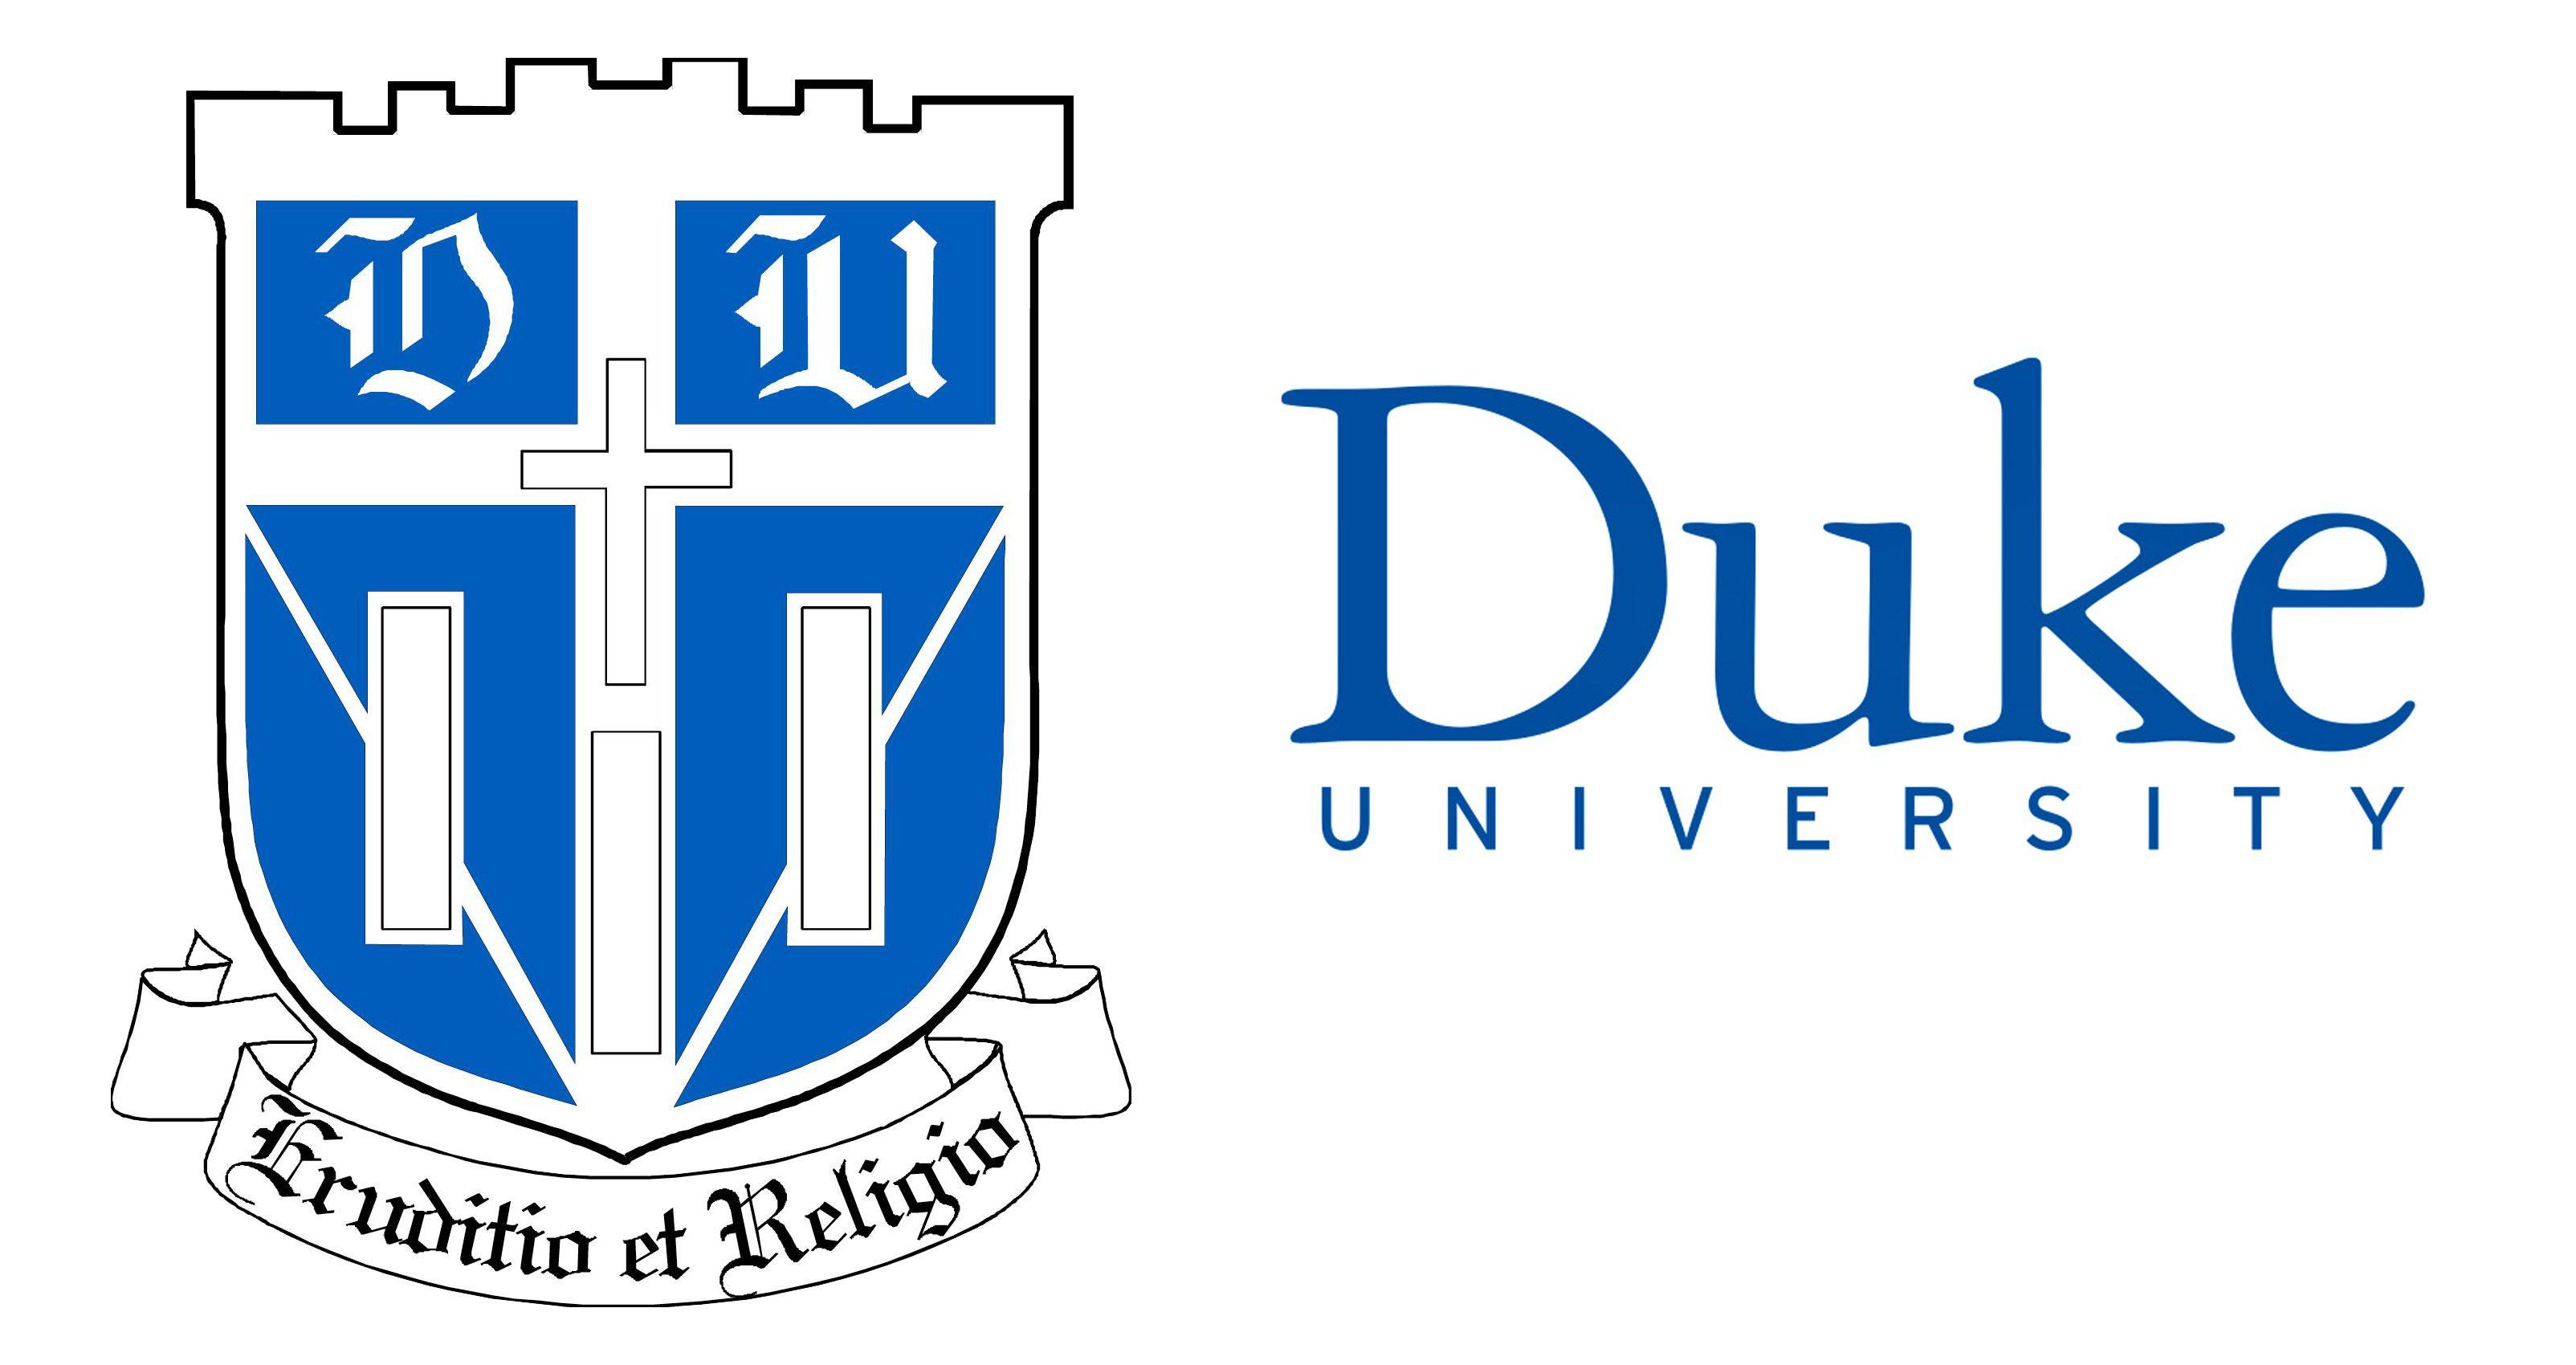 Duke Logo - Duke University Logo, Duke University Symbol, Meaning, History